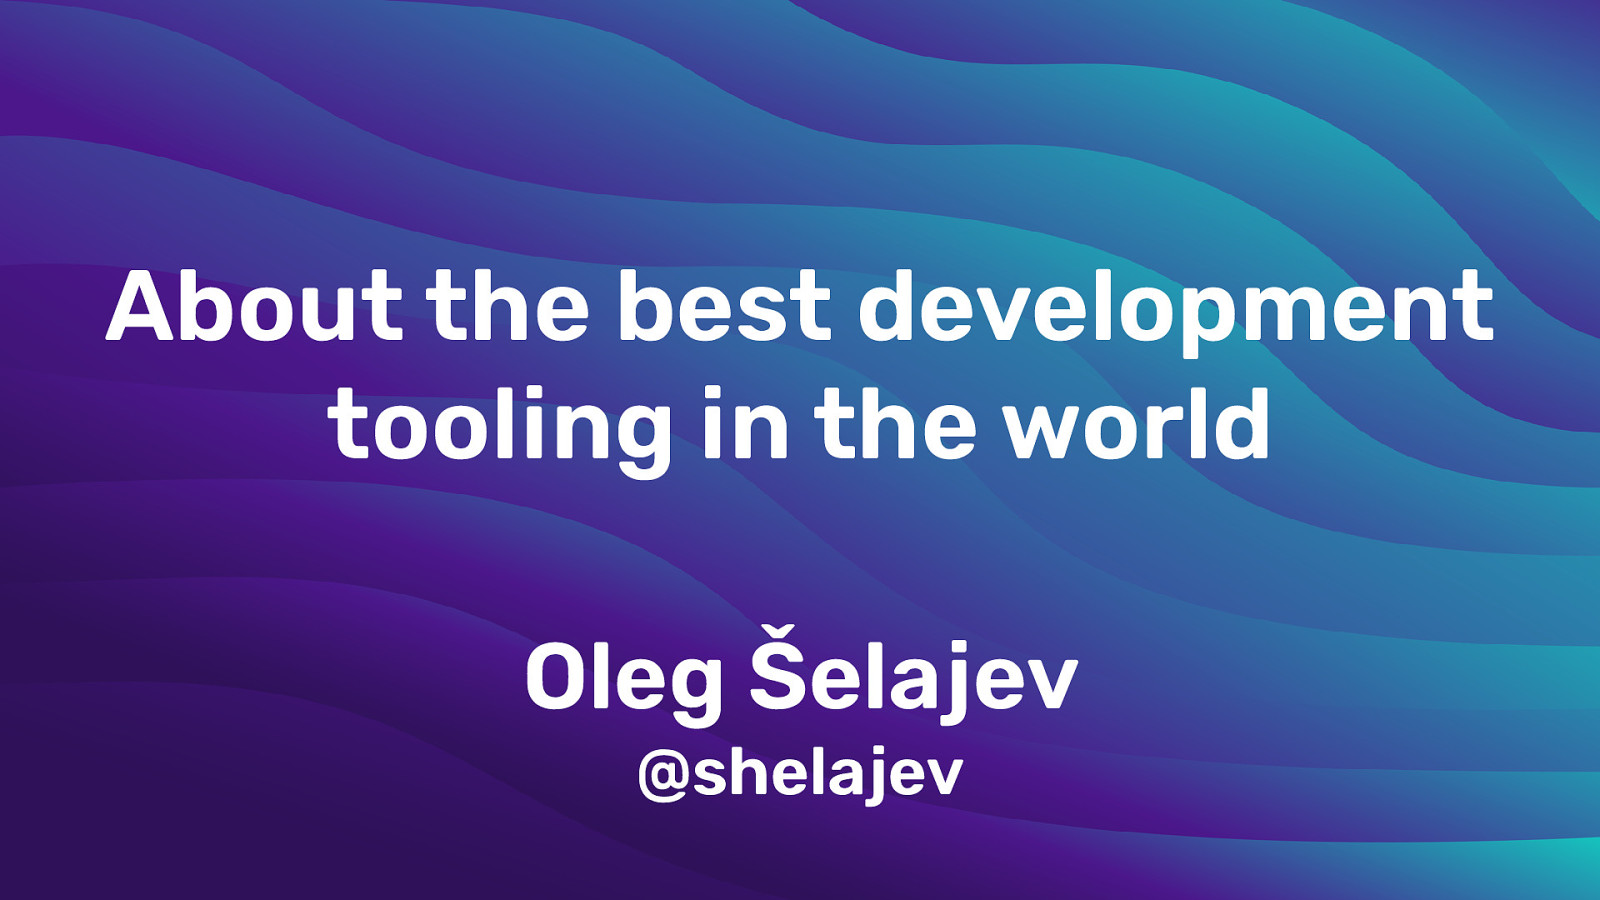 About the best development tooling in the world